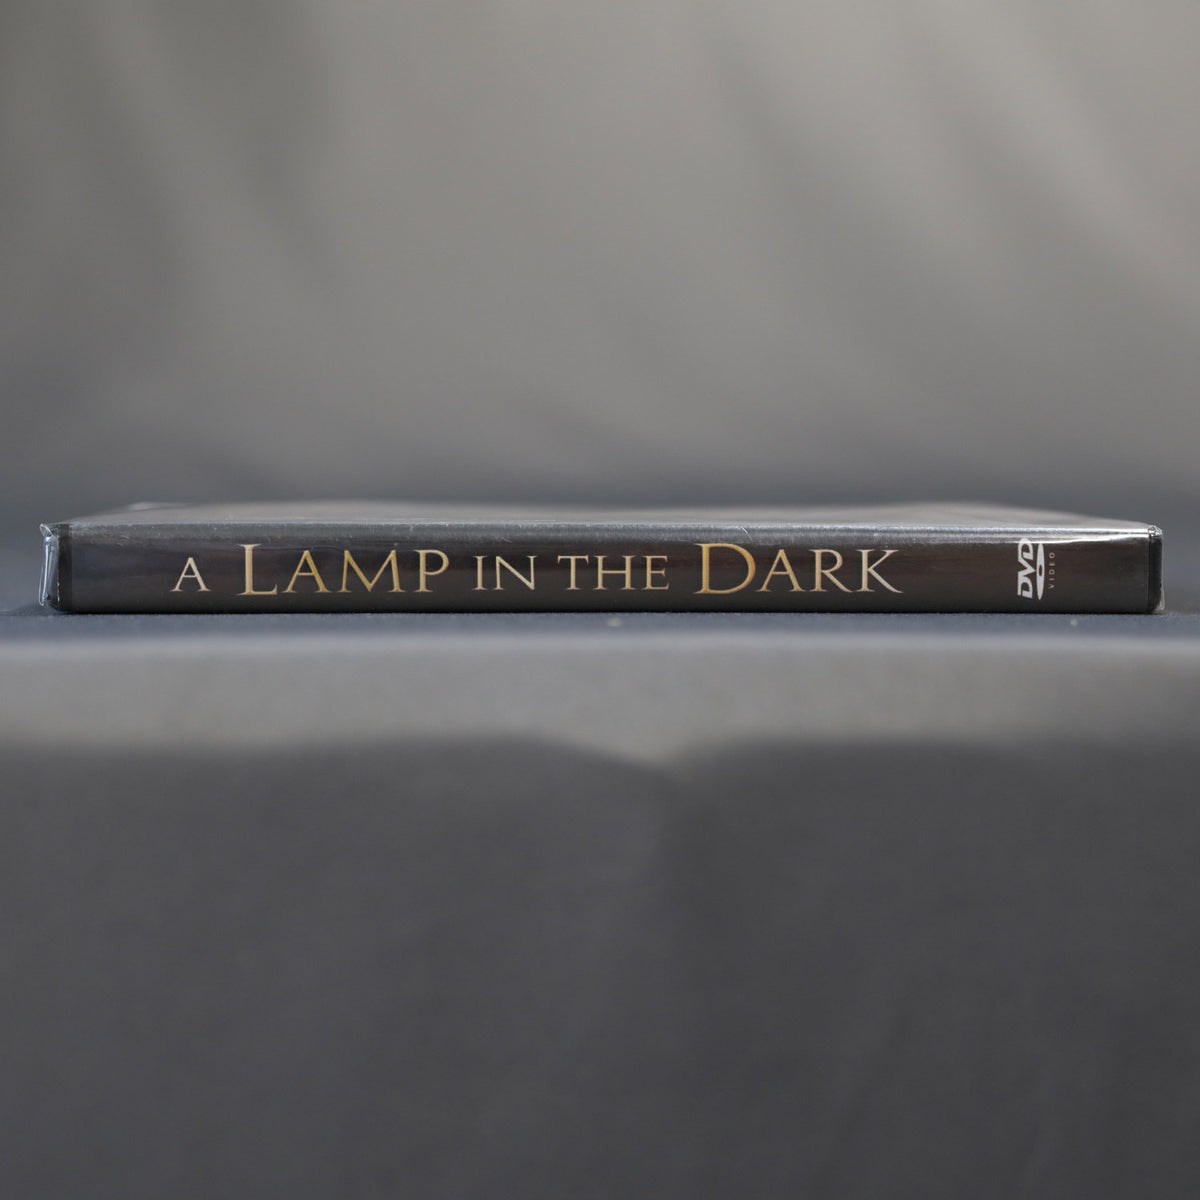 A Lamp in the Dark: The Untold History of the Bible (DVD)